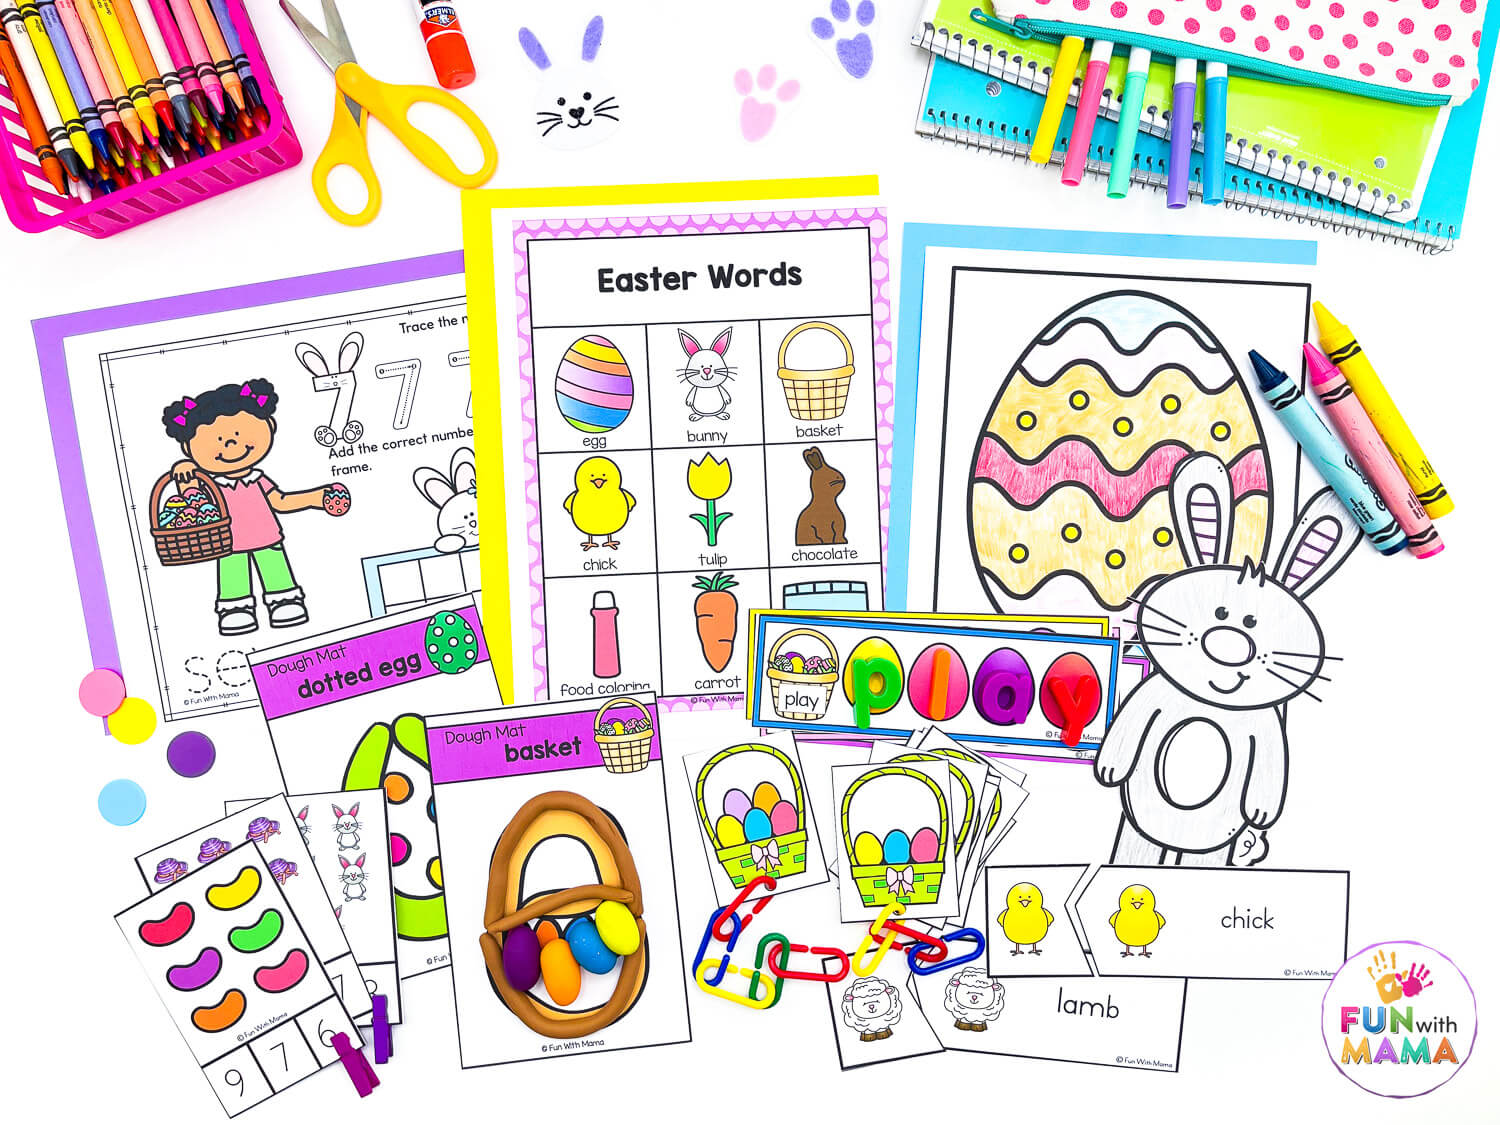 Easter activities for vocabulary words, sight words, play dough mats, coloring pages, and counting